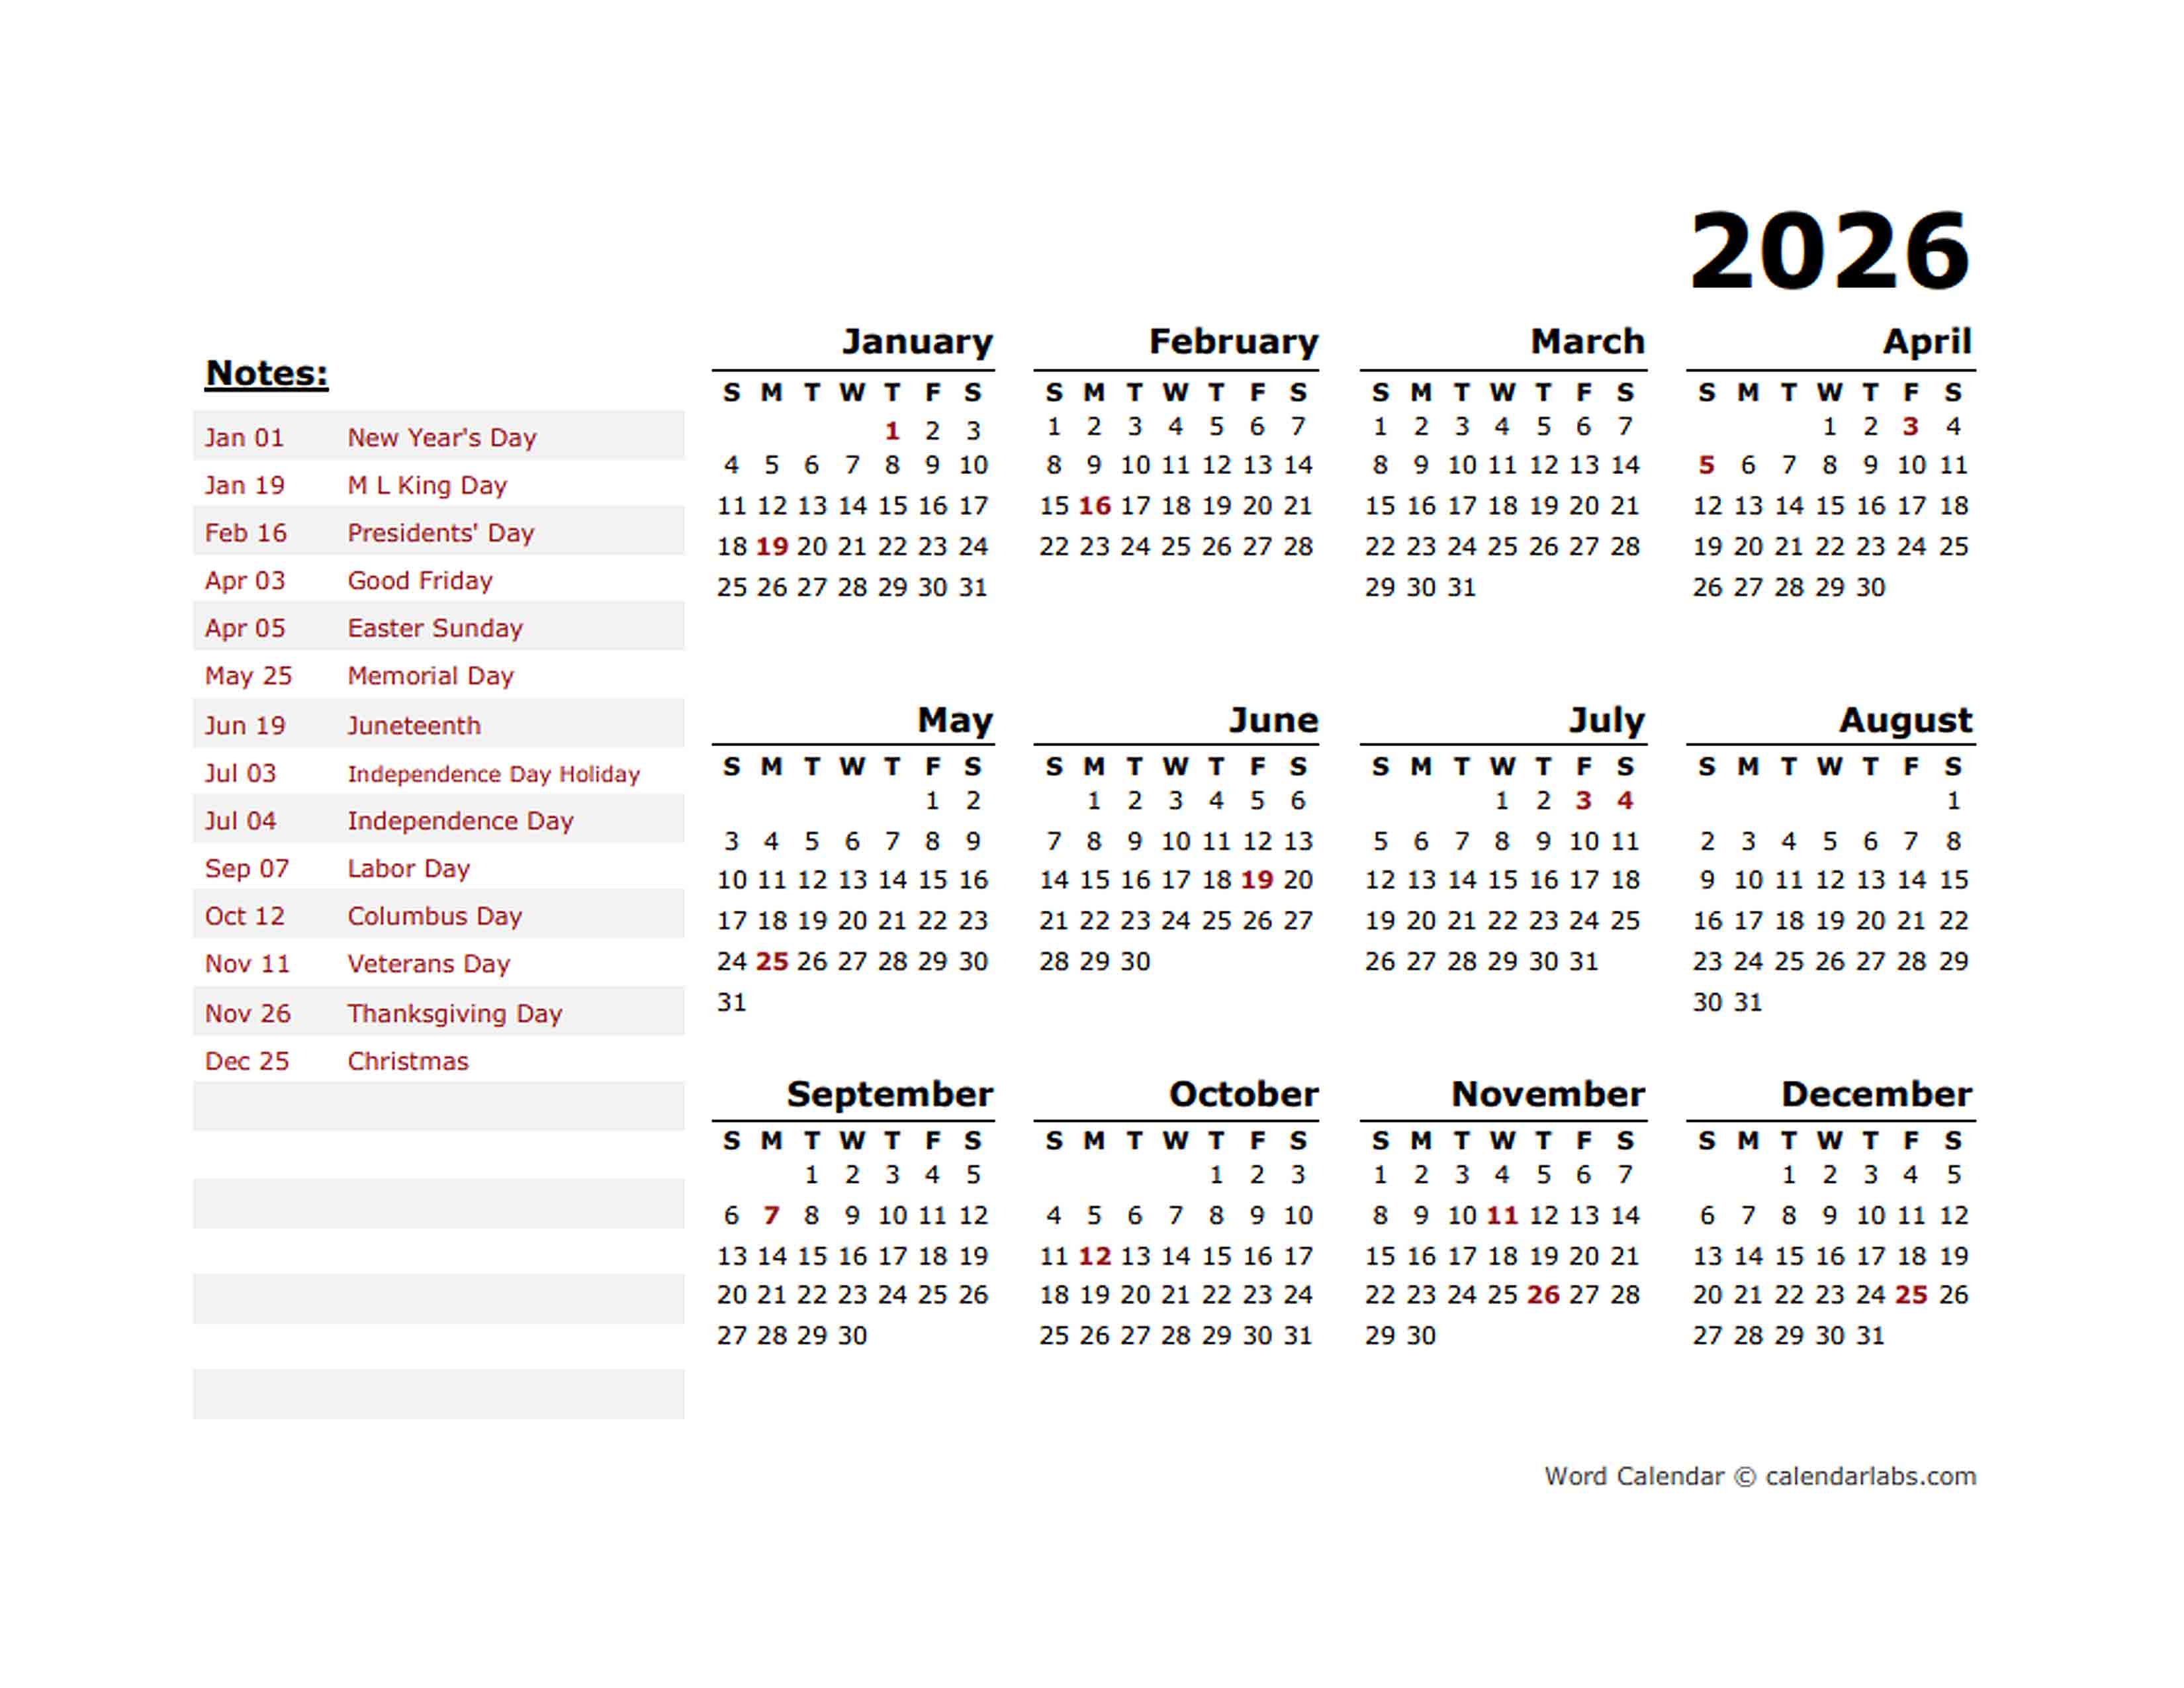 2026 Year Calendar Word Template With Holidays - Free Printable Templates